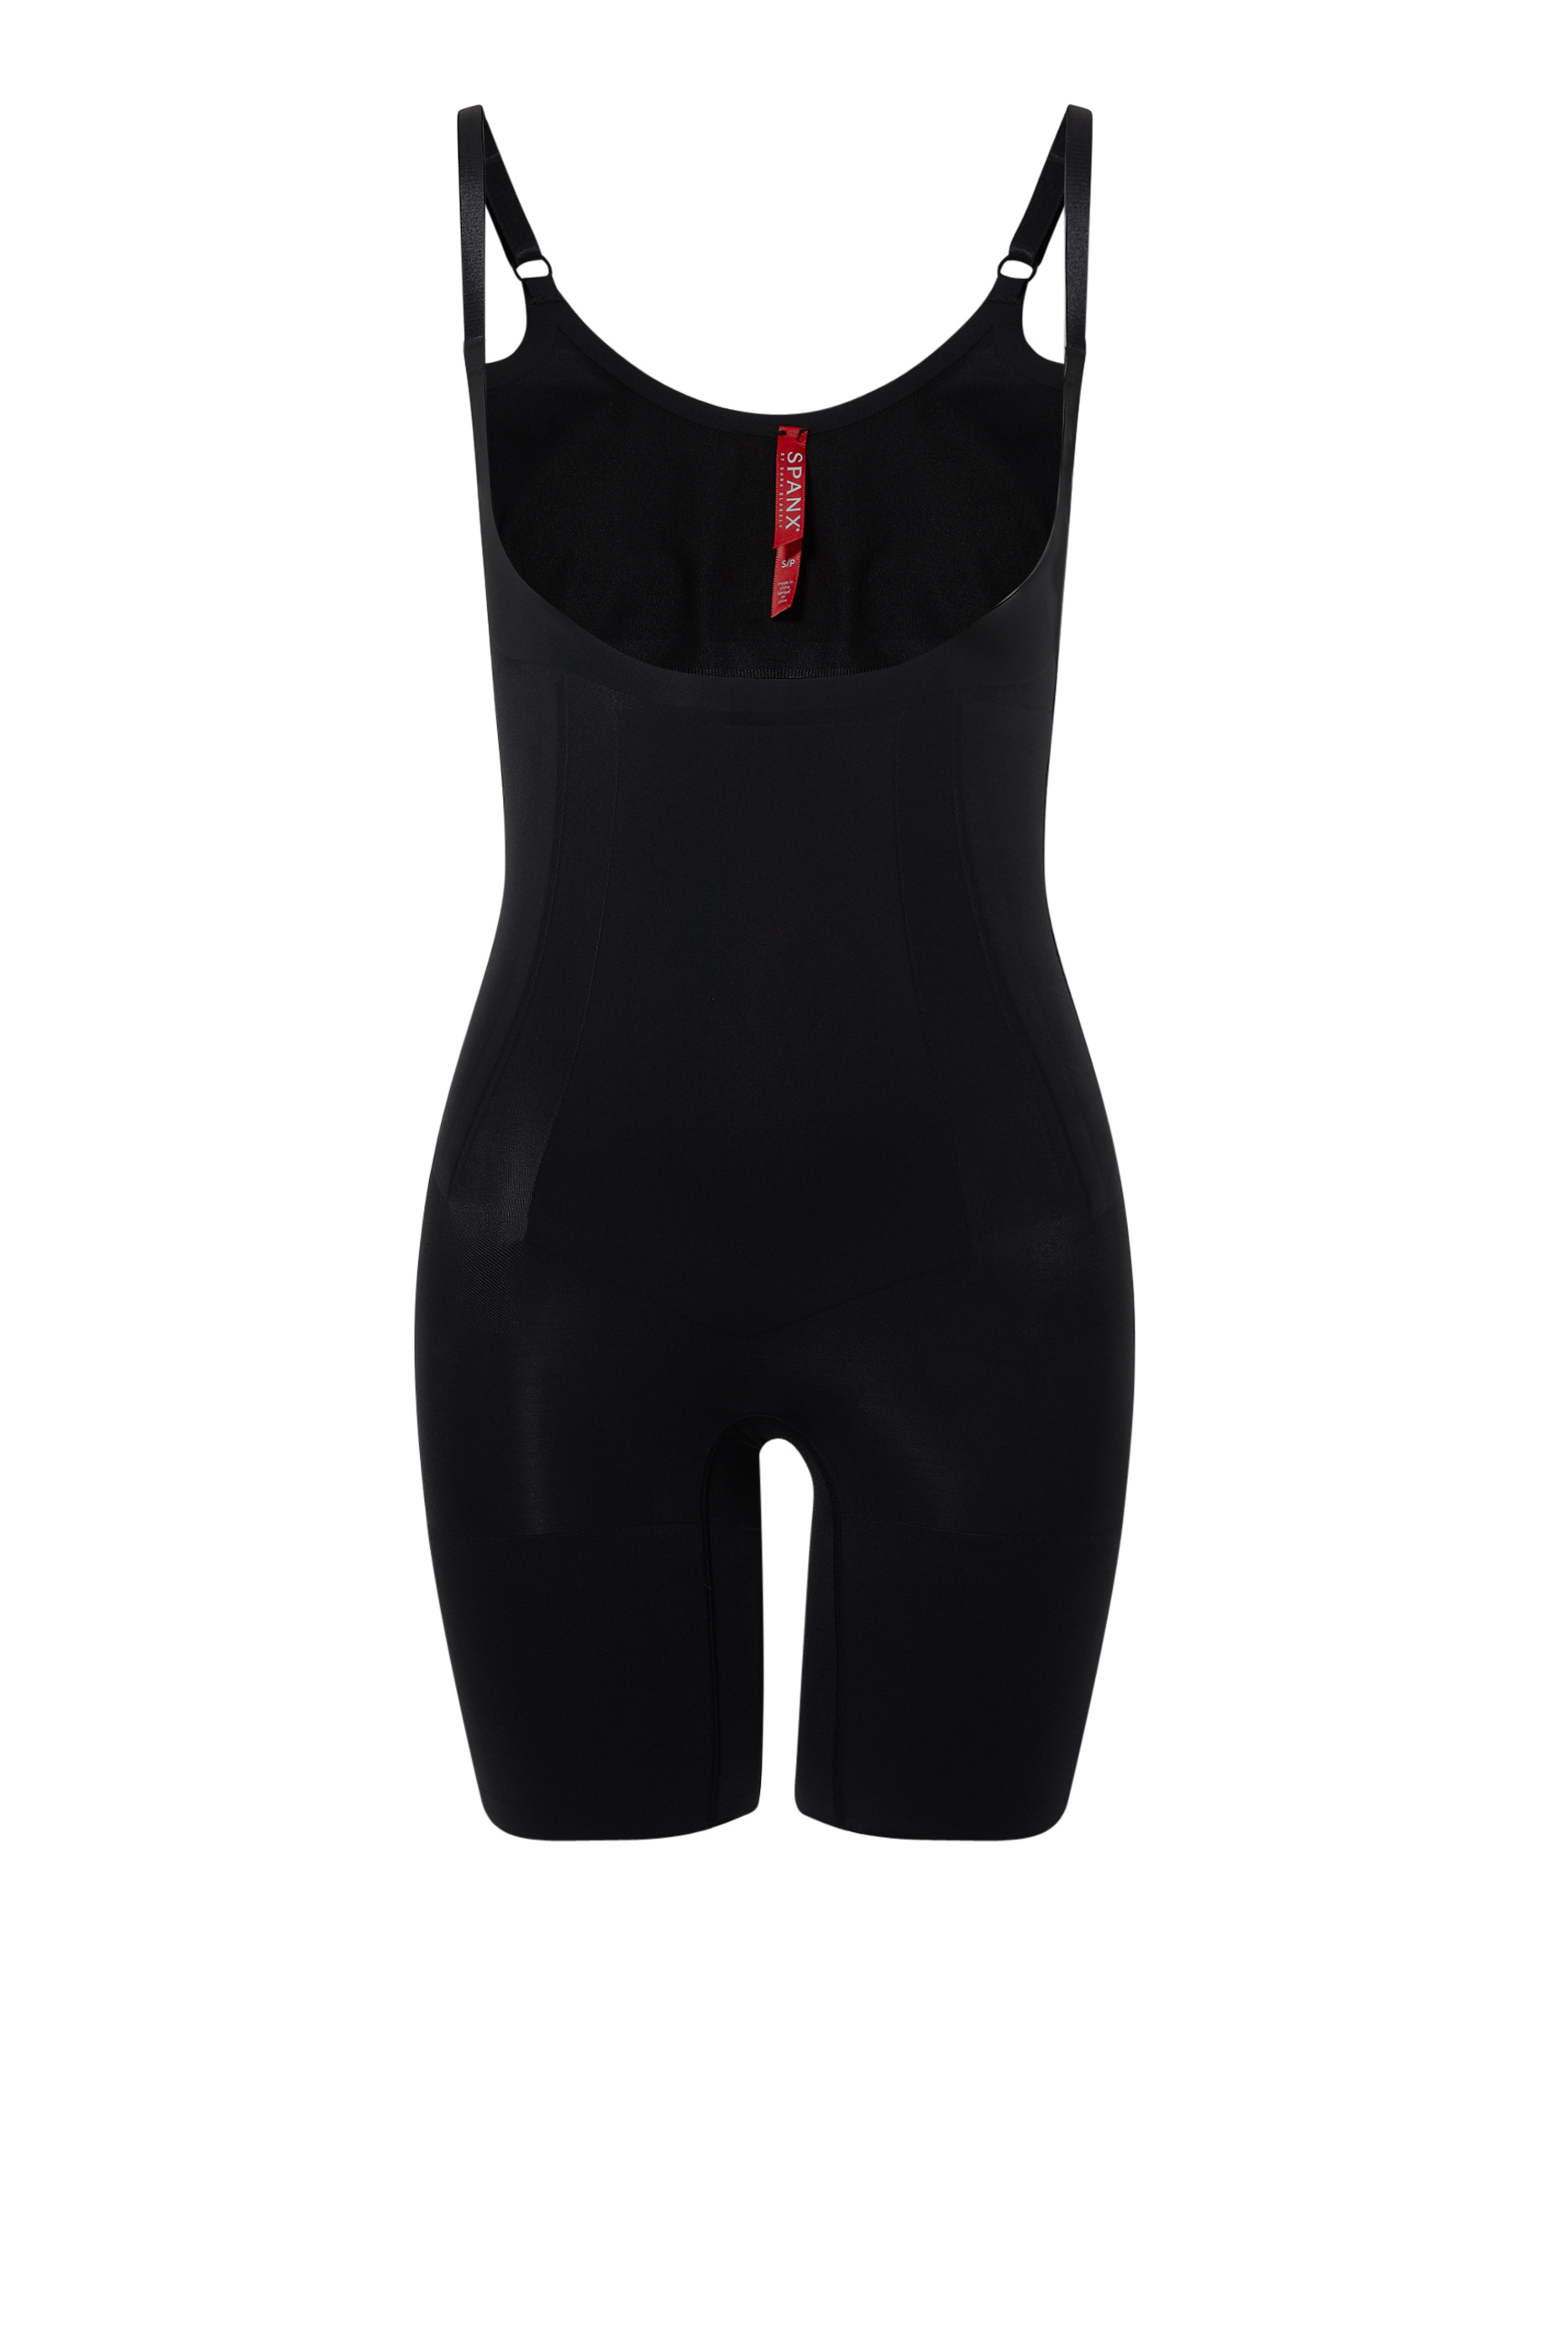 Buy Spanx Oncore Open Bust Mid-Thigh Body Suit for | Bloomingdale's KSA